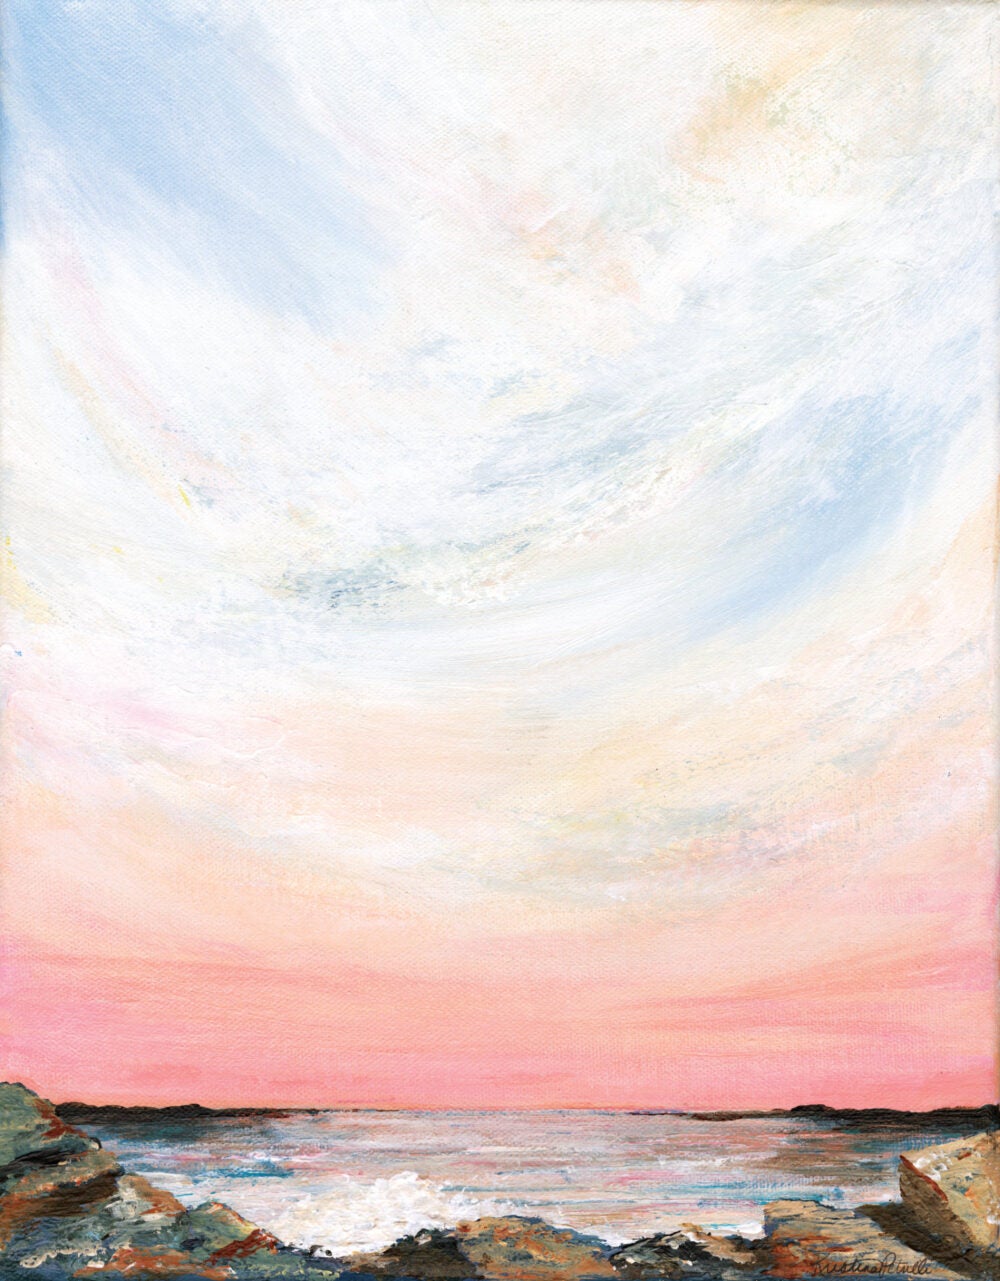 Seascape painting with large sunset sky over water and rocky foreground